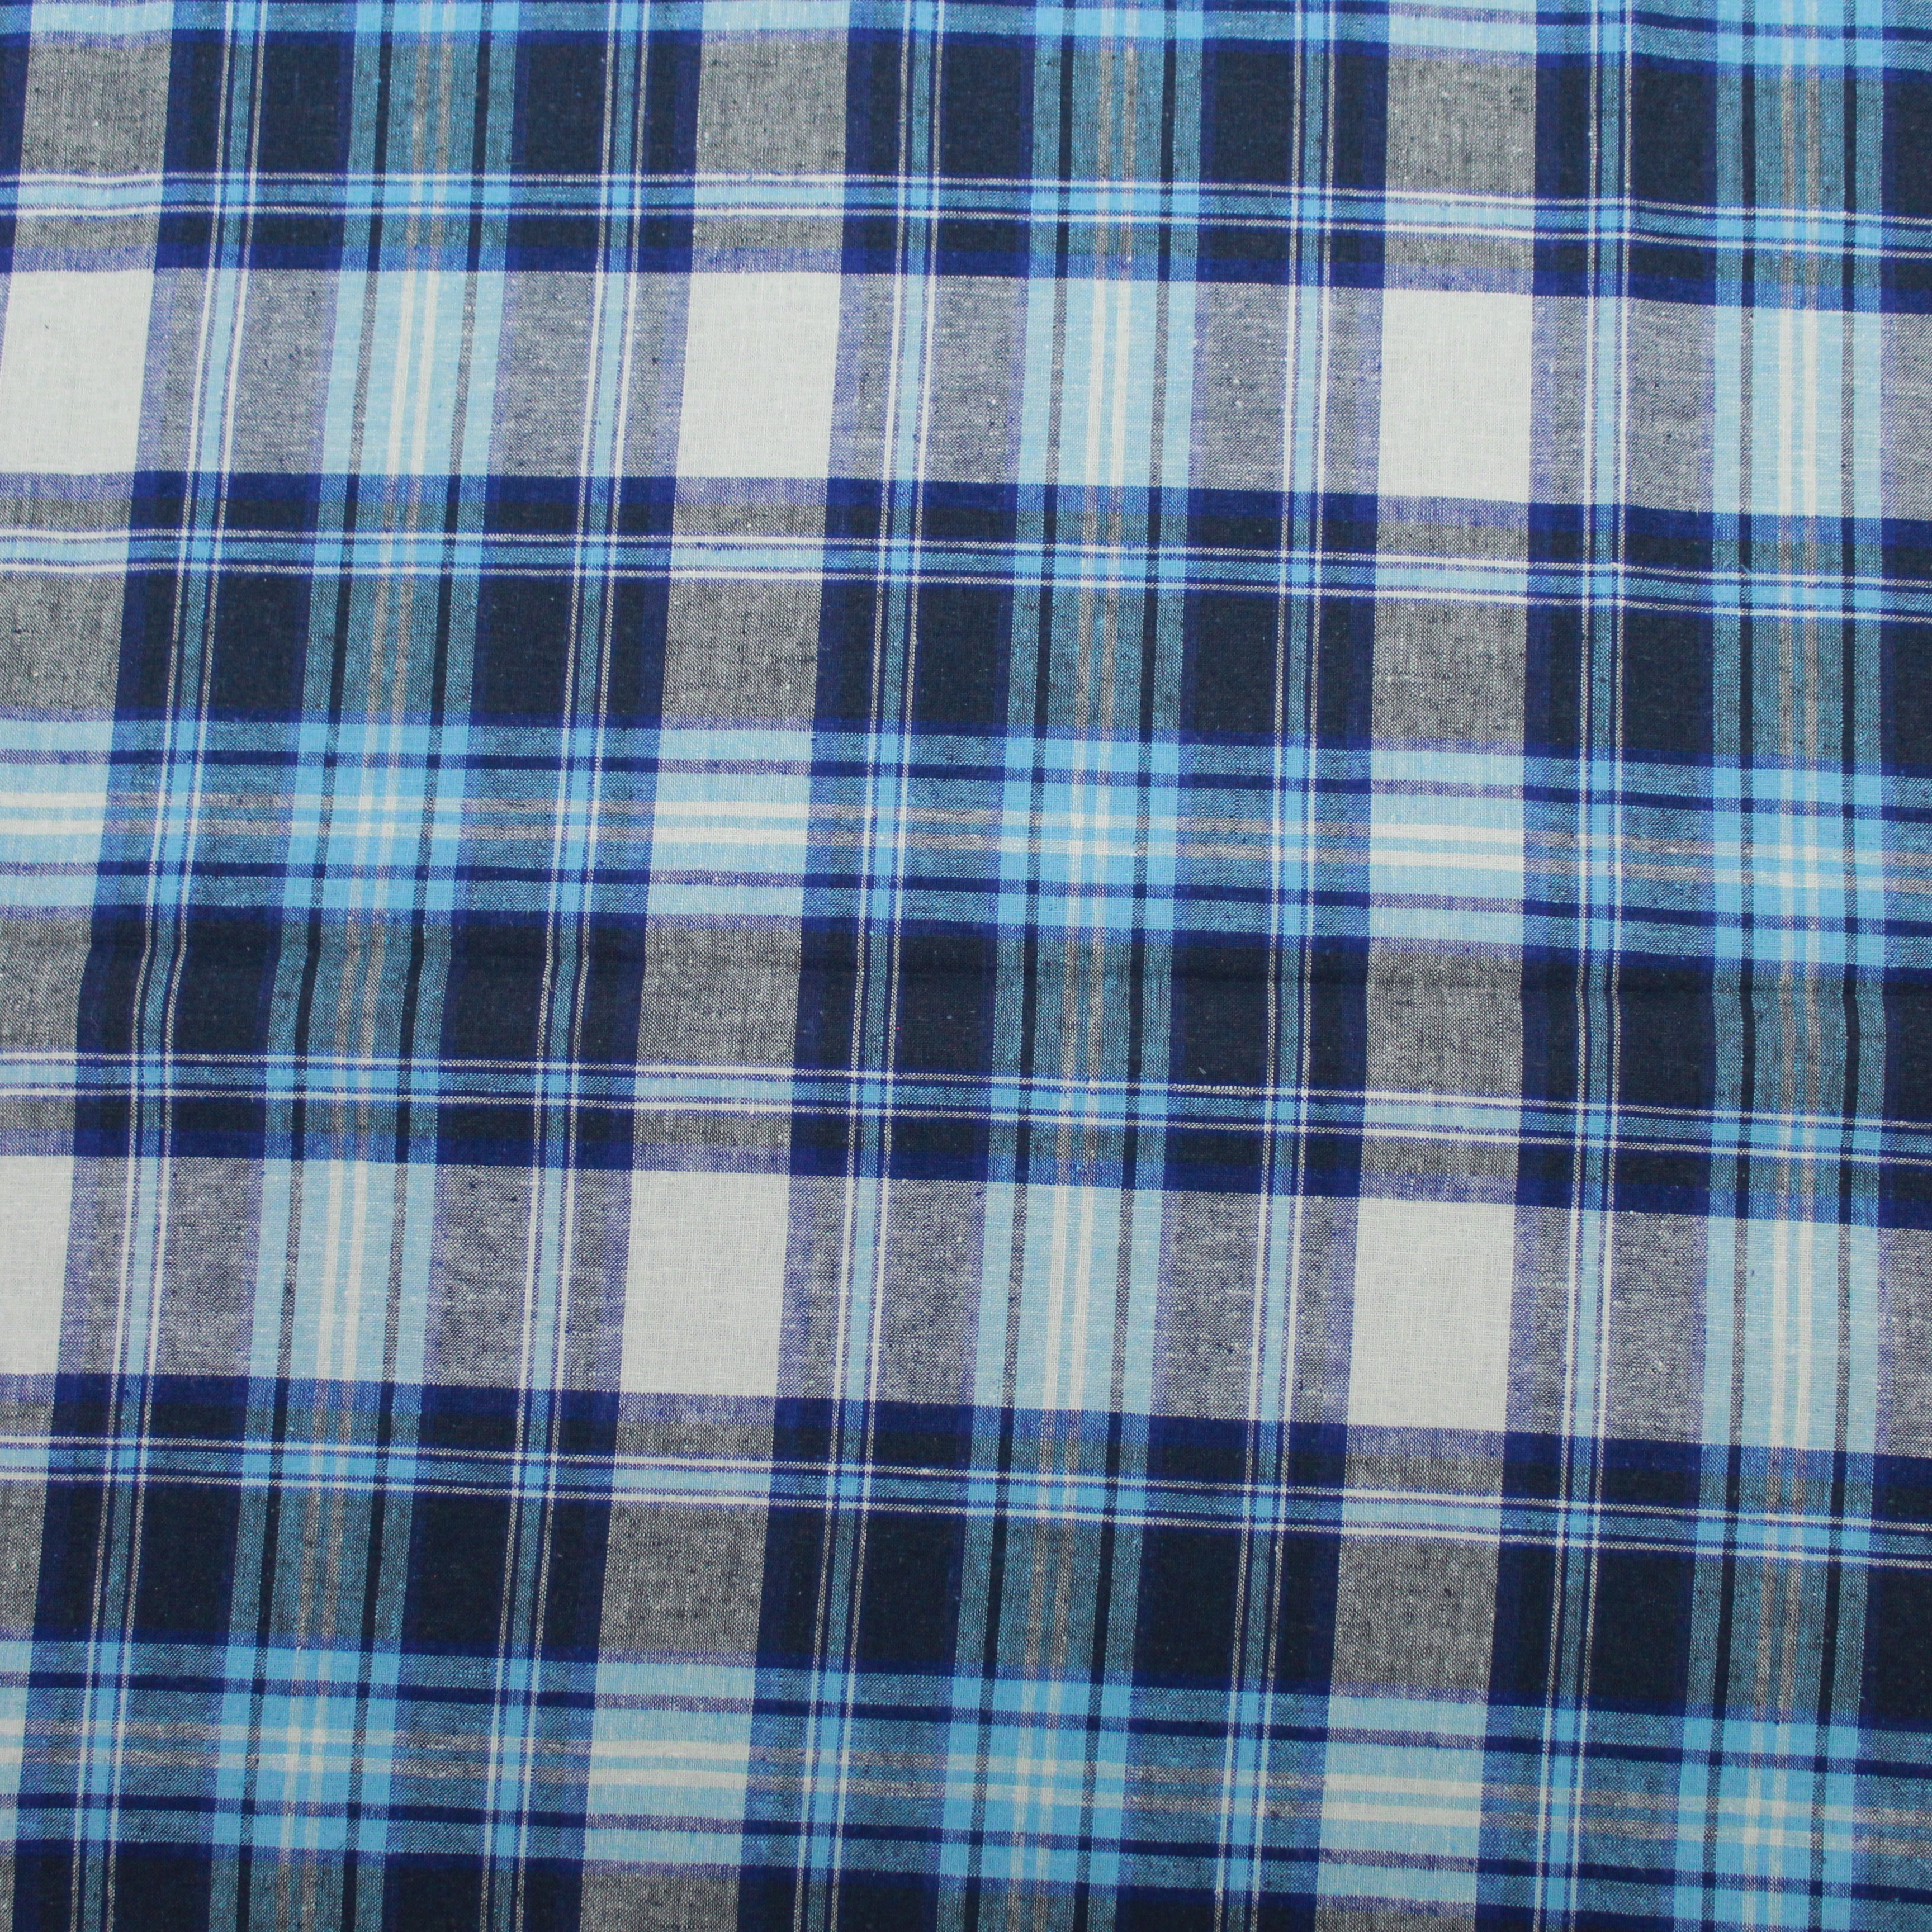 3FOR12 Premium Quality, Fashion Chequered Linen 54" Wide Royal Blue & Light Blue